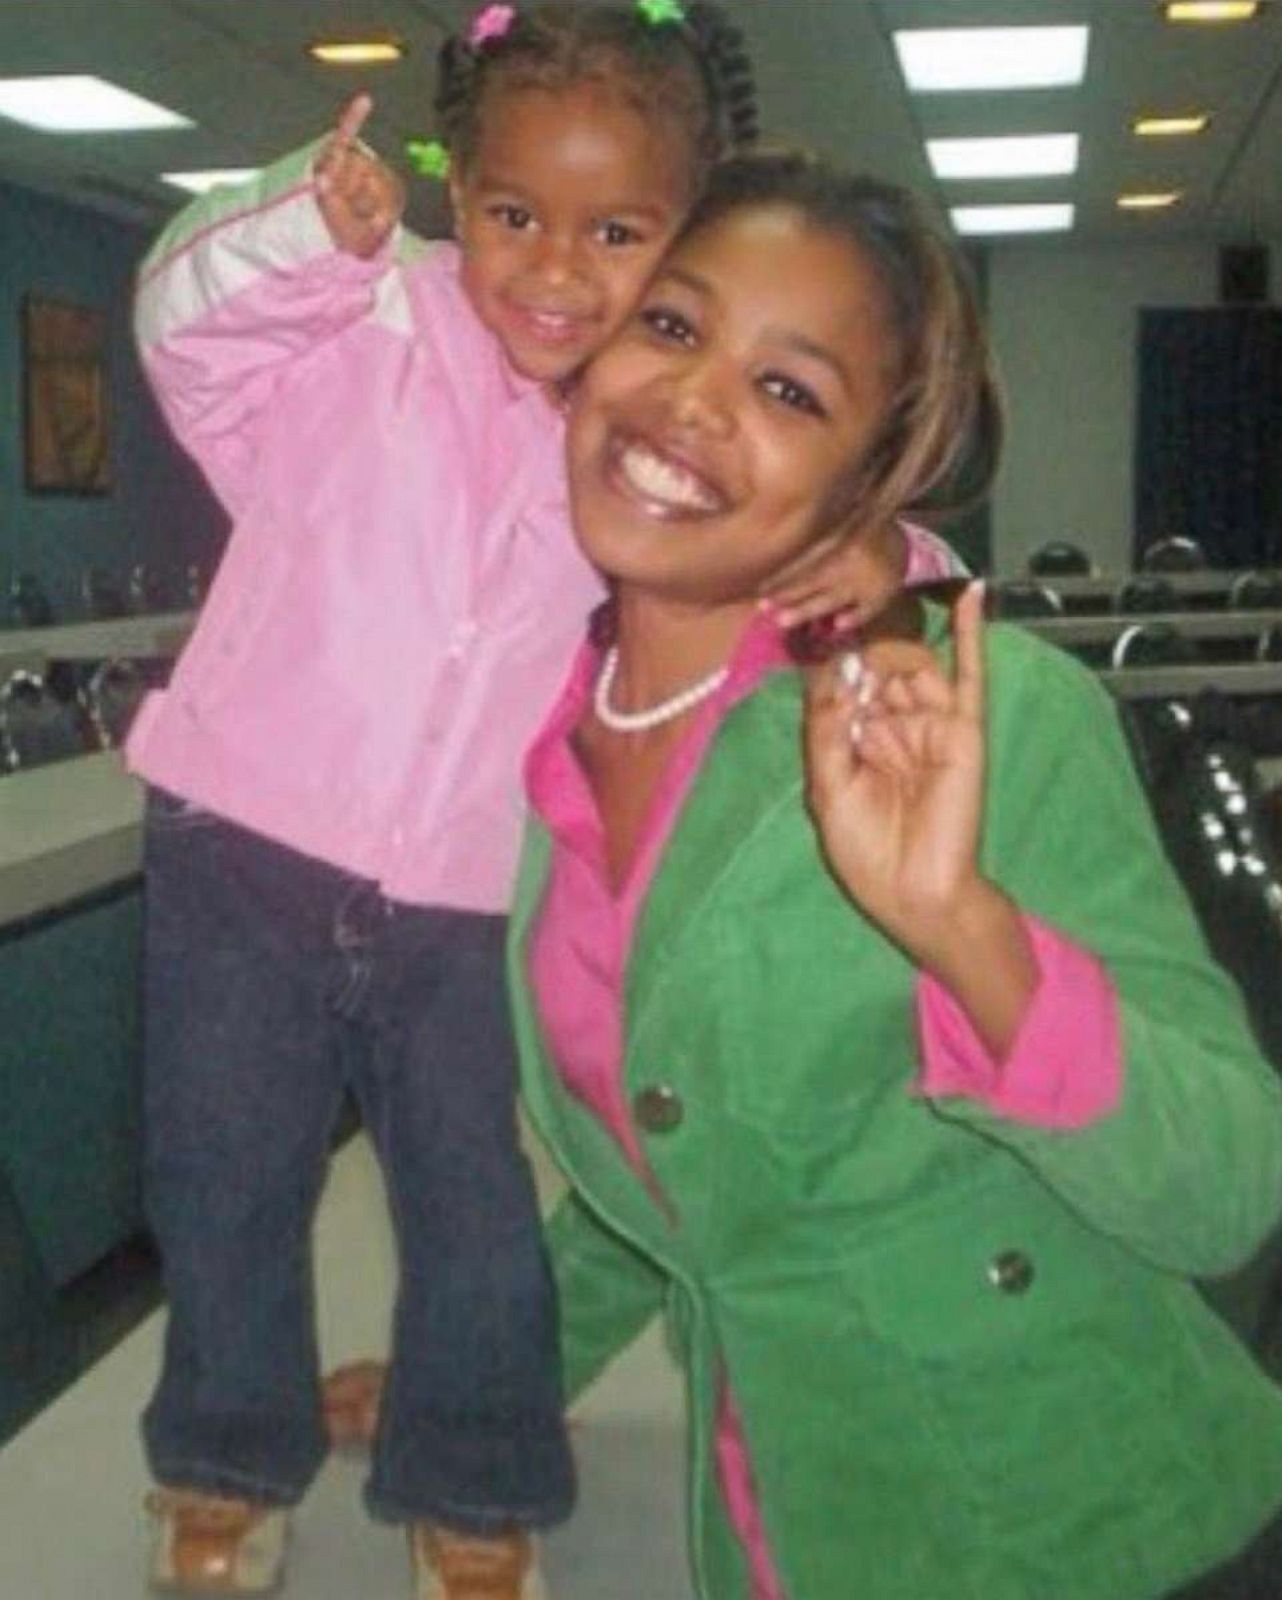 PHOTO: Jerica Phillips poses with her daughter Jaidah at her sorority initiation in 2005 at the University of Tennessee-Knoxville.